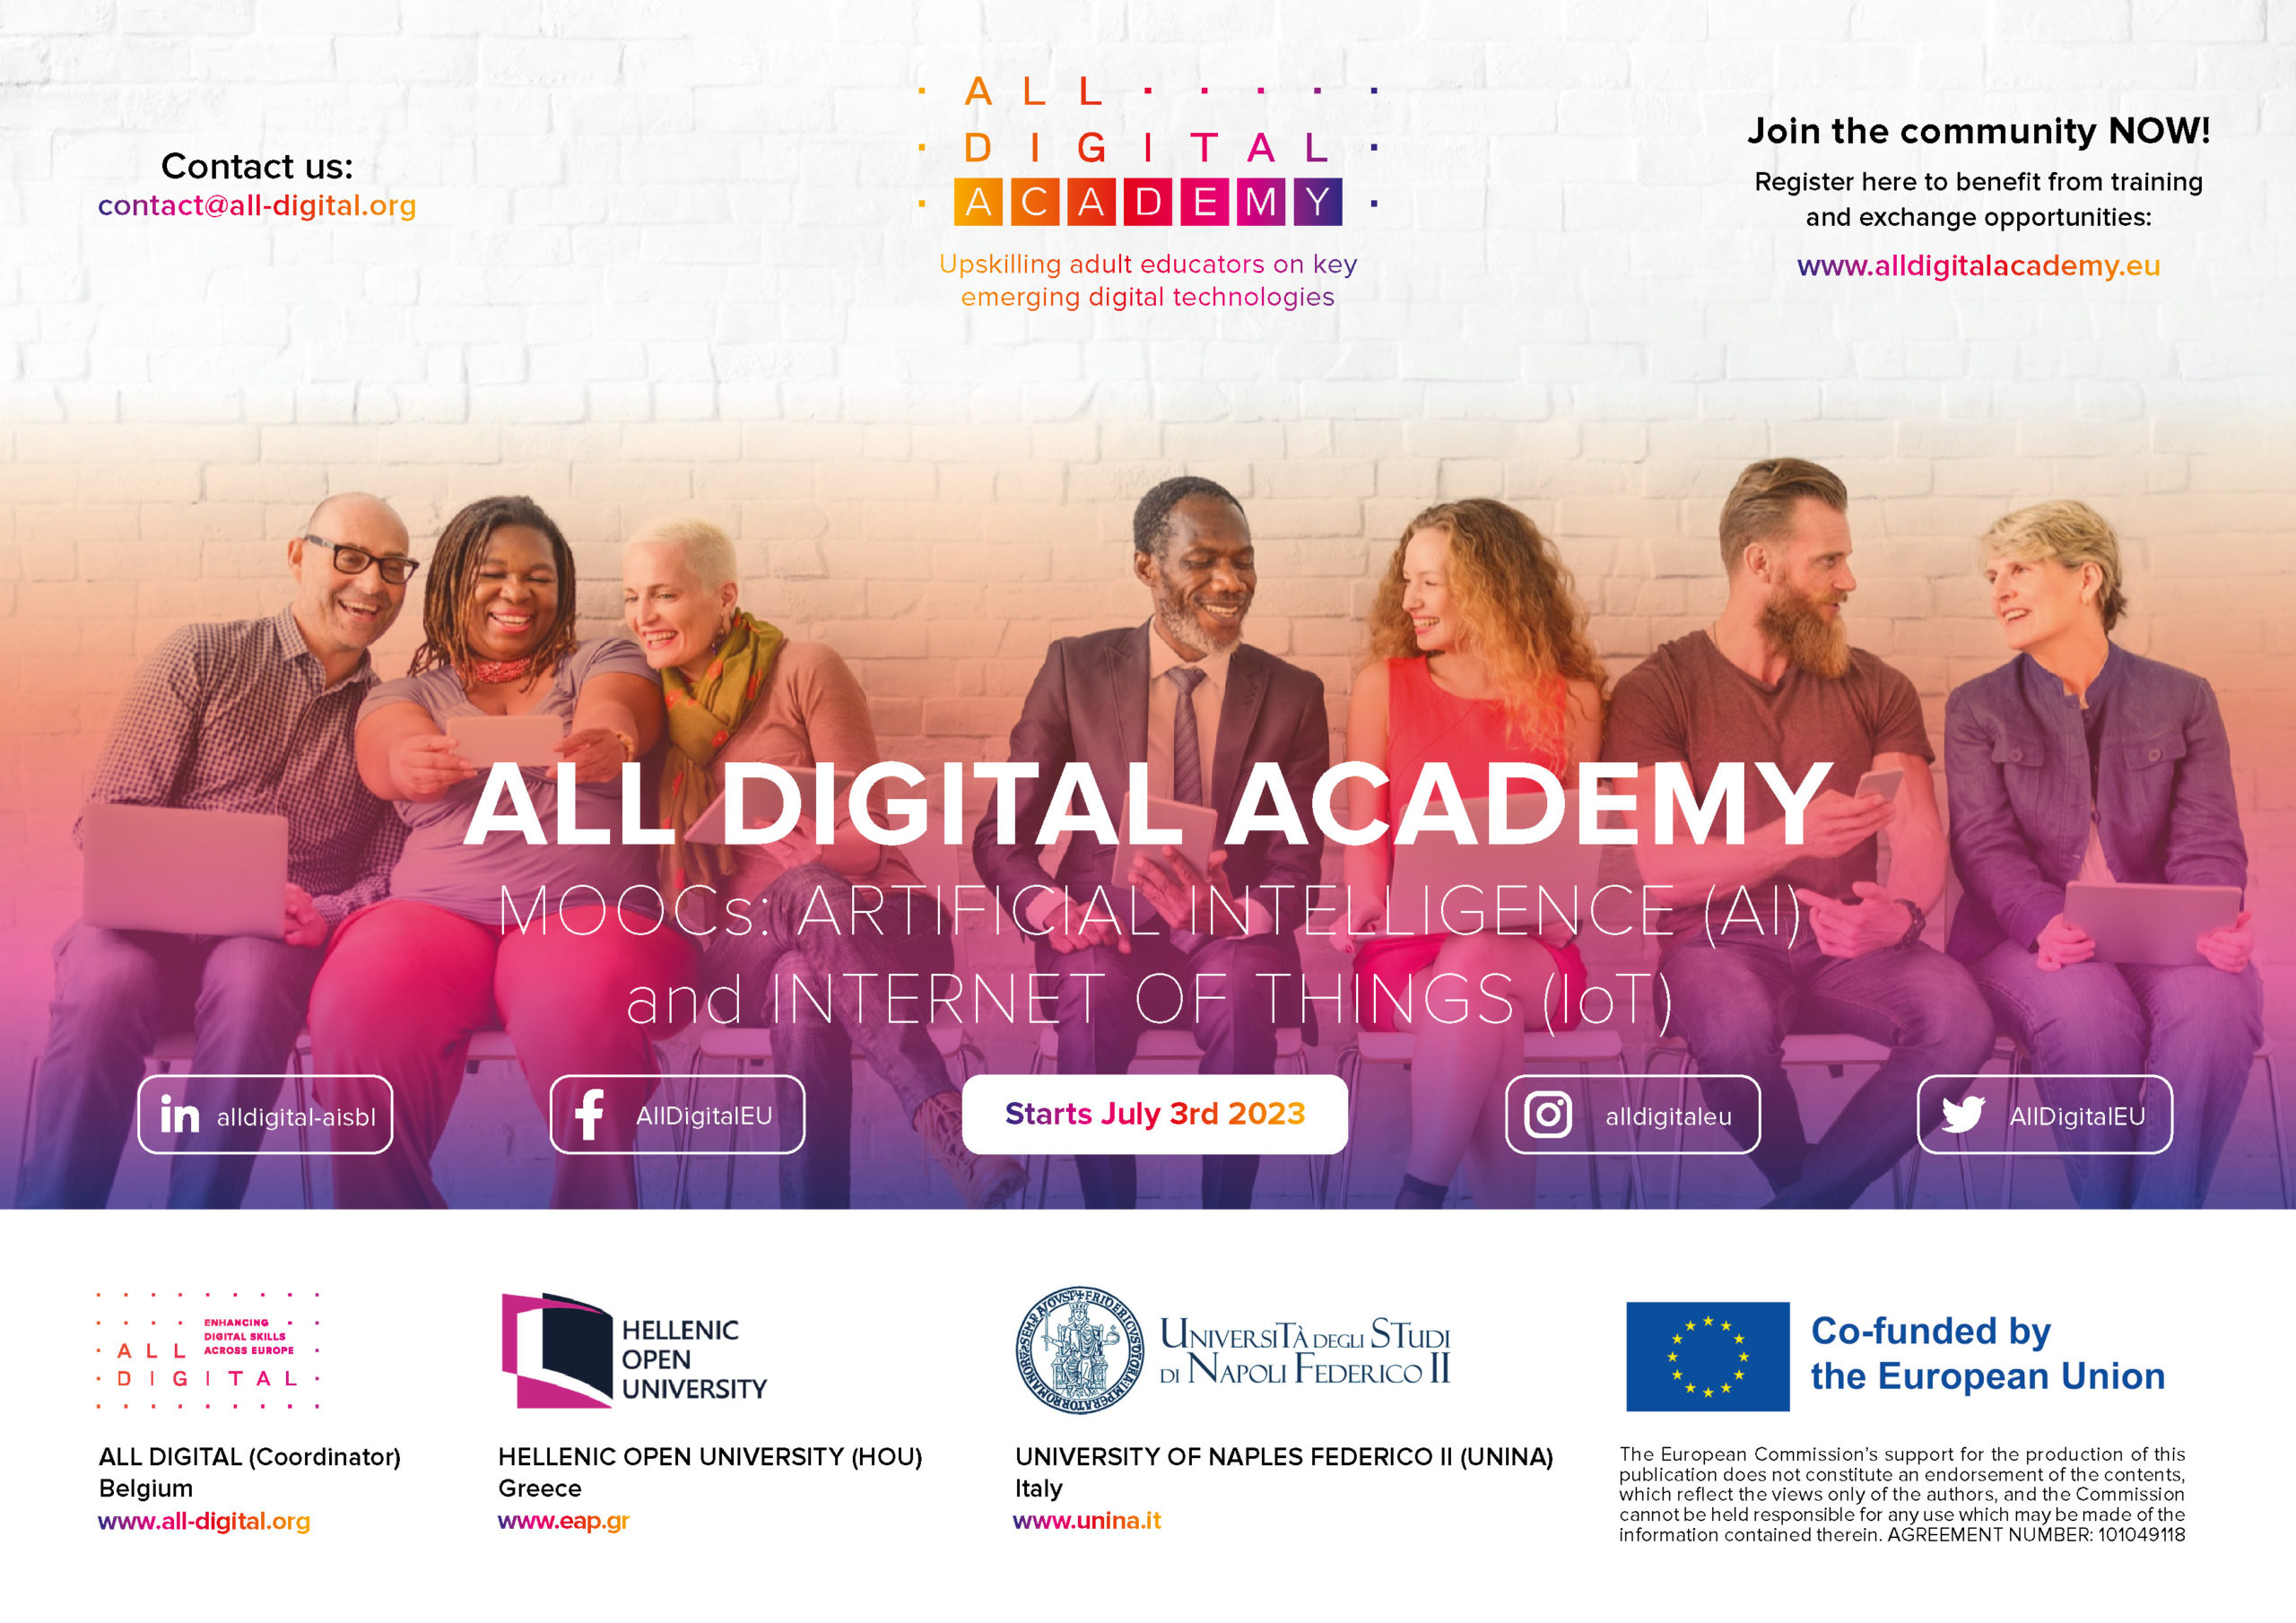 ALL DIGITAL ACADEMY: Free MOOCs for Adult Trainers on AI and IoT!